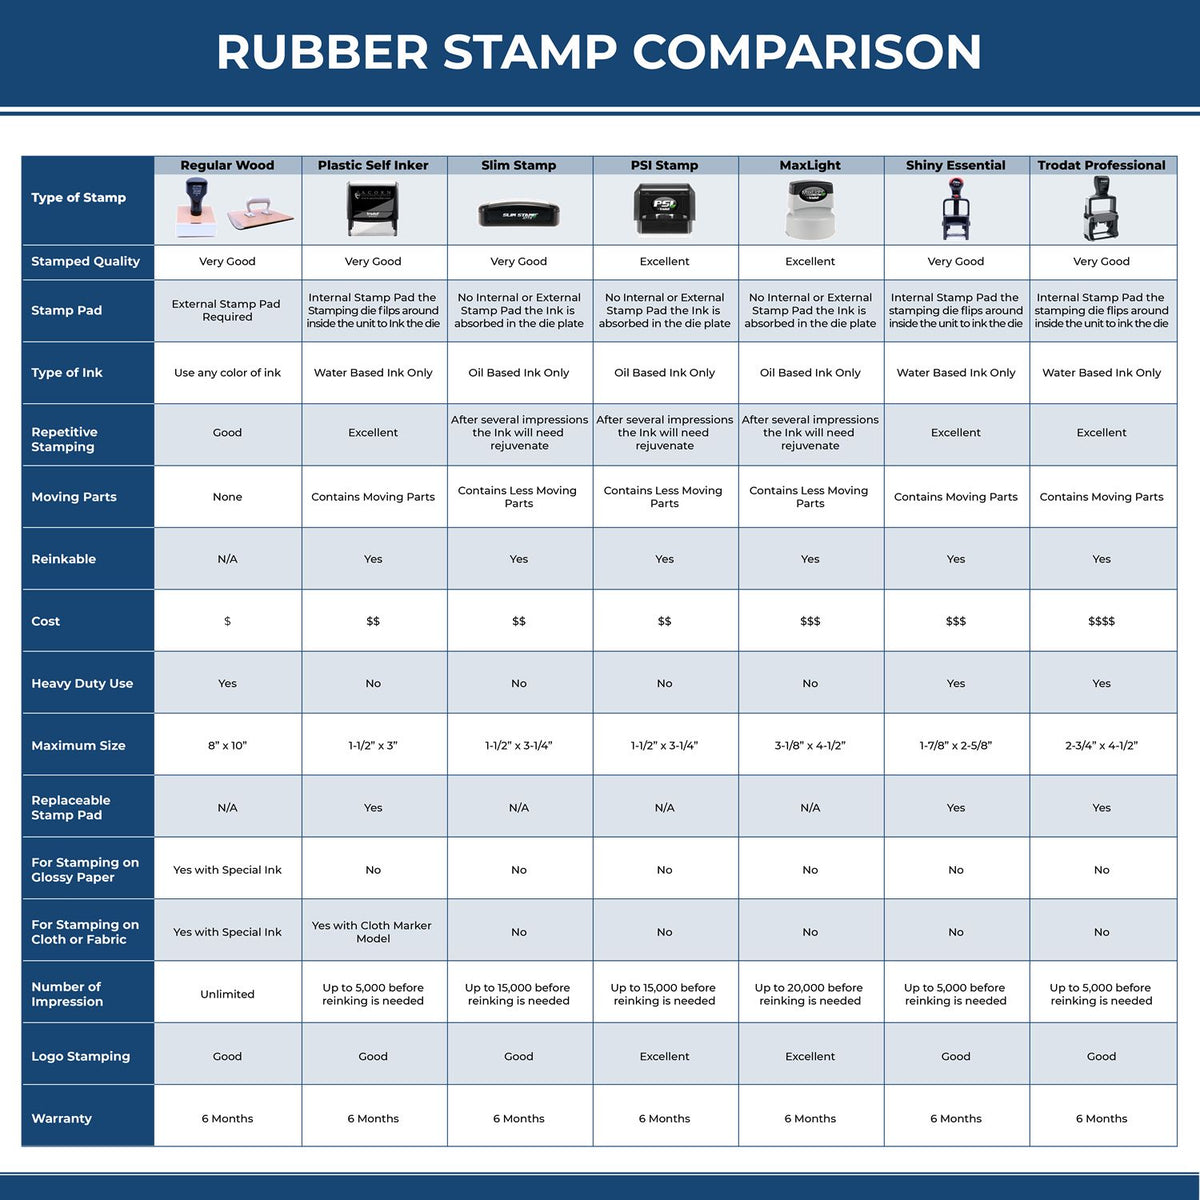 Large Self Inking Approved For Payment Stamp 4104S Rubber Stamp Comparison